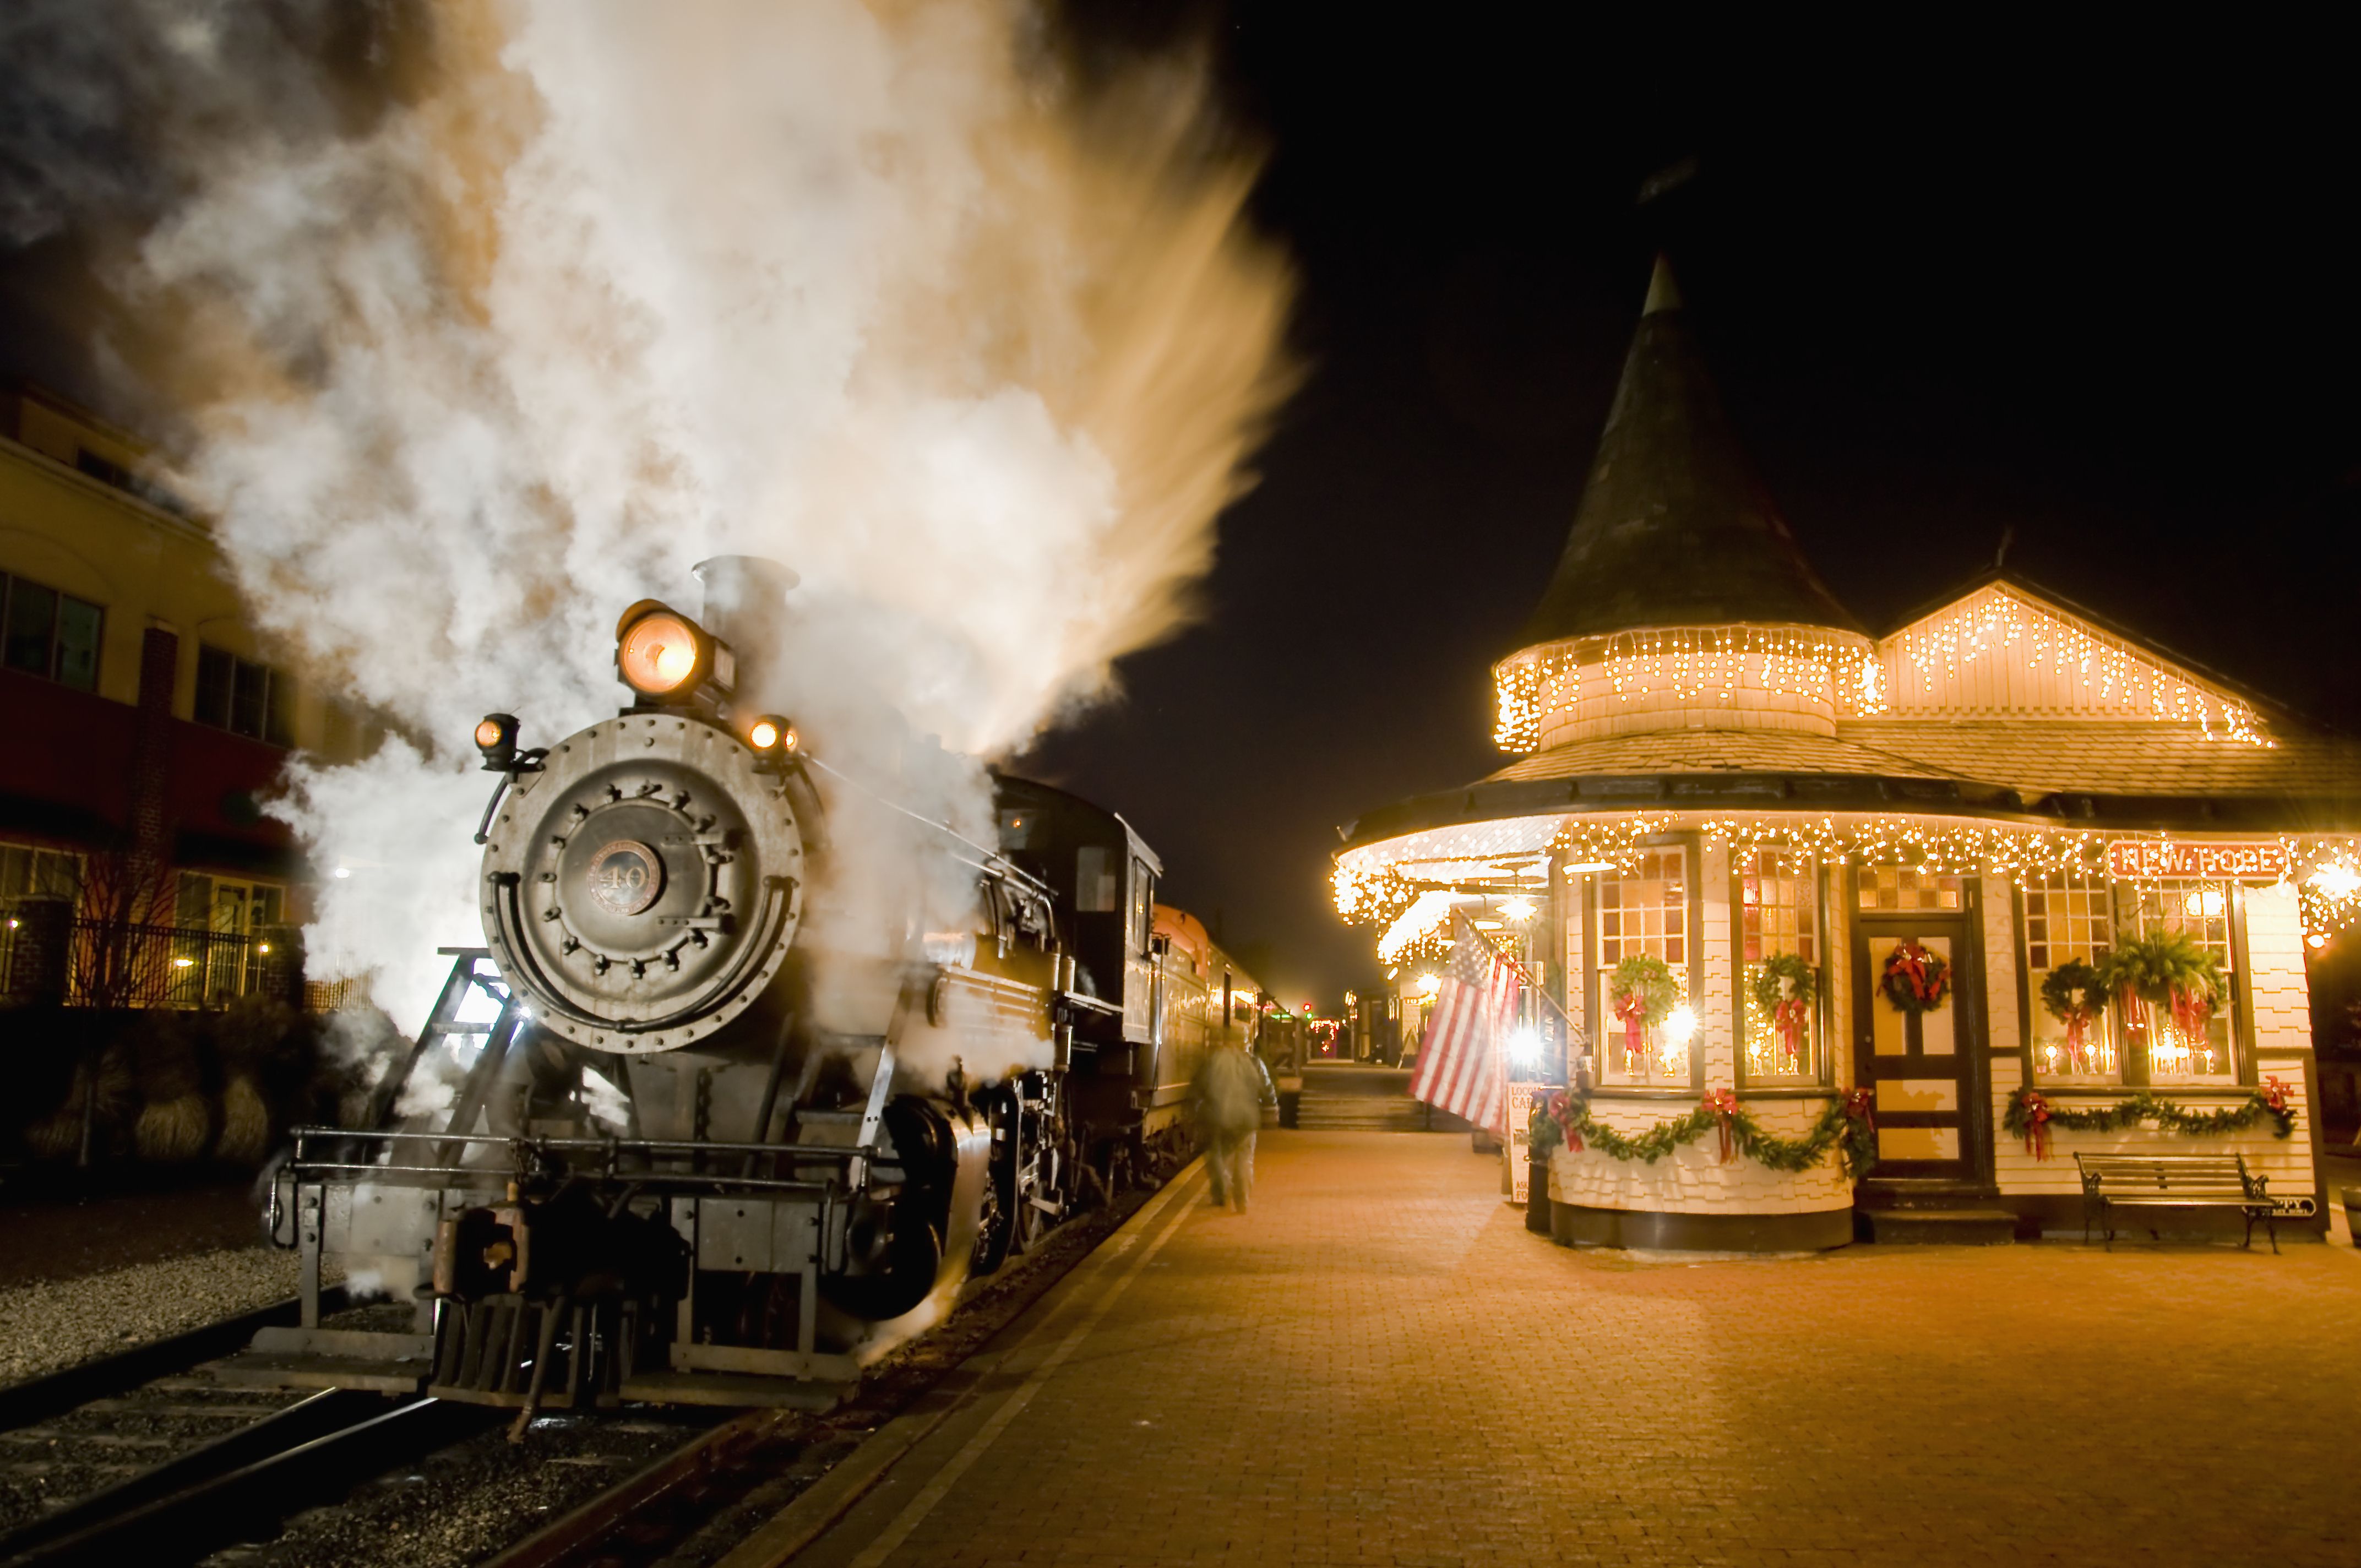 15 Best Polar Express Train Rides for Christmas 2019 - Locations of Polar Express Trains